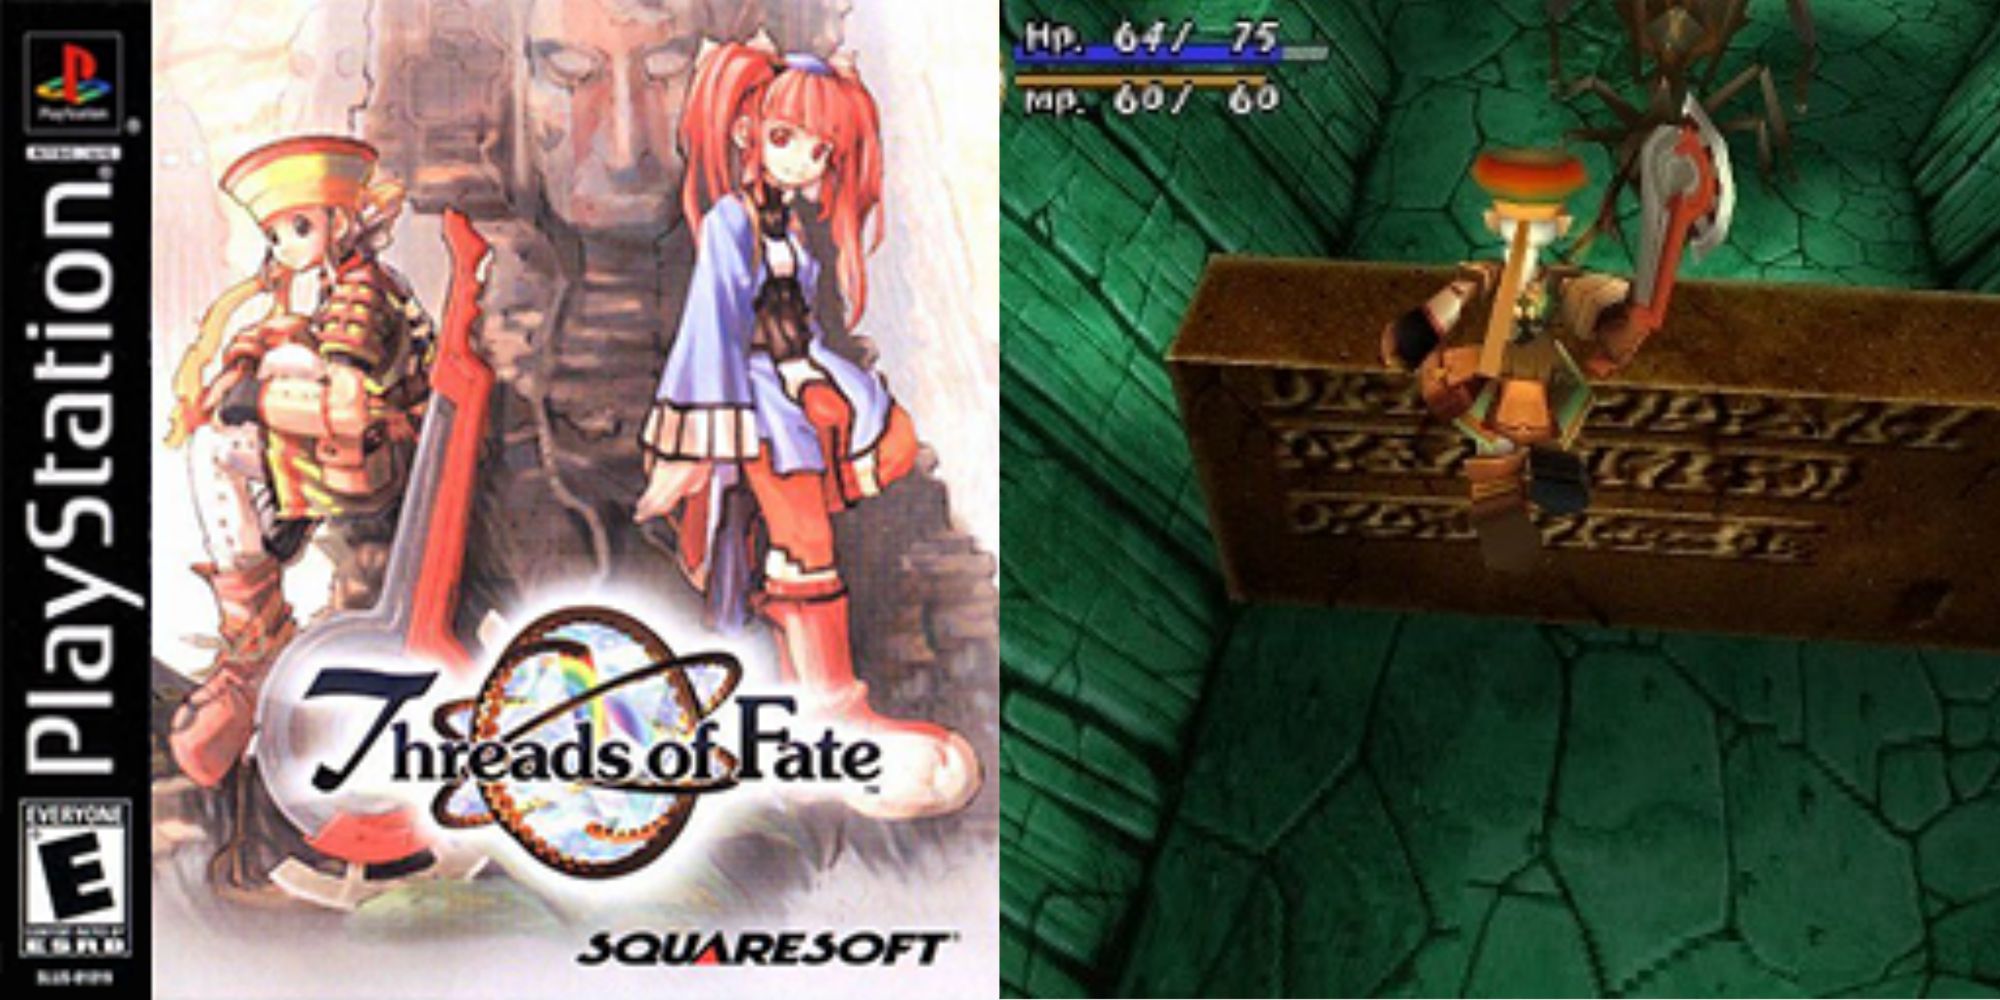 Split image screenshots of the Threads of Fate boxart and the main character jumping.